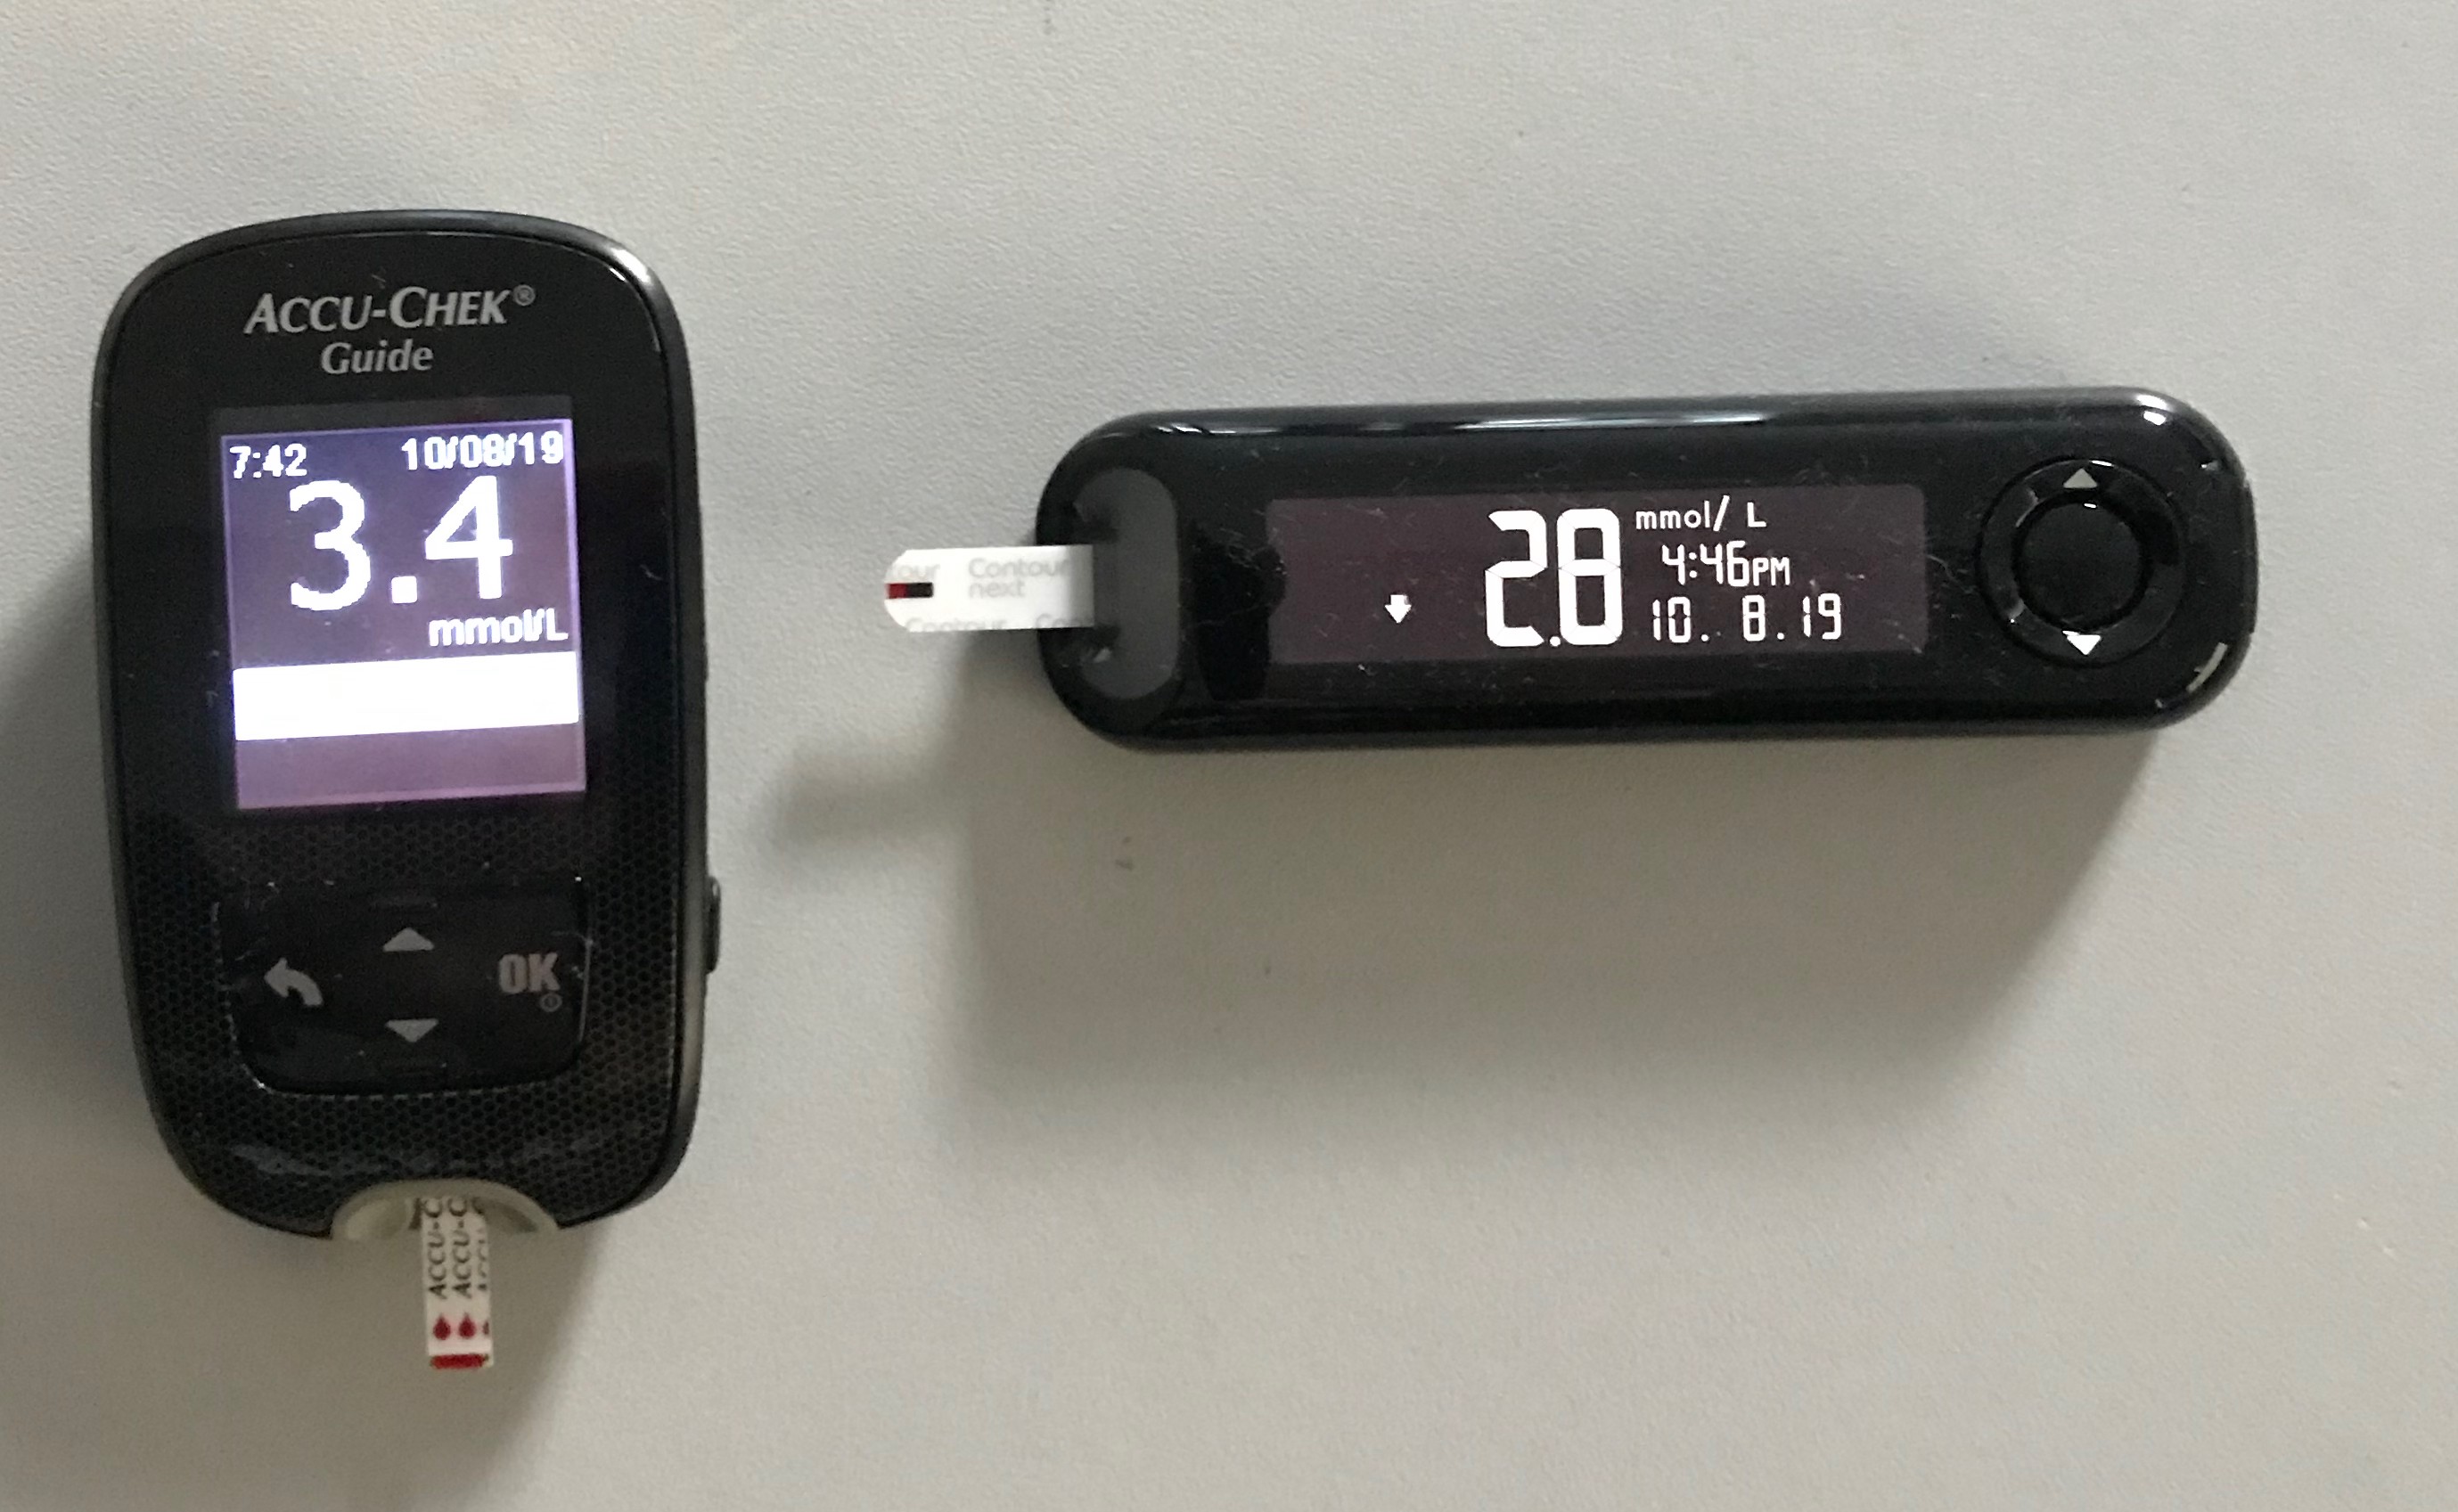 Two blood glucose meters, one showing 3.4 mmol/L and the other showing 2.8 mmol/L.